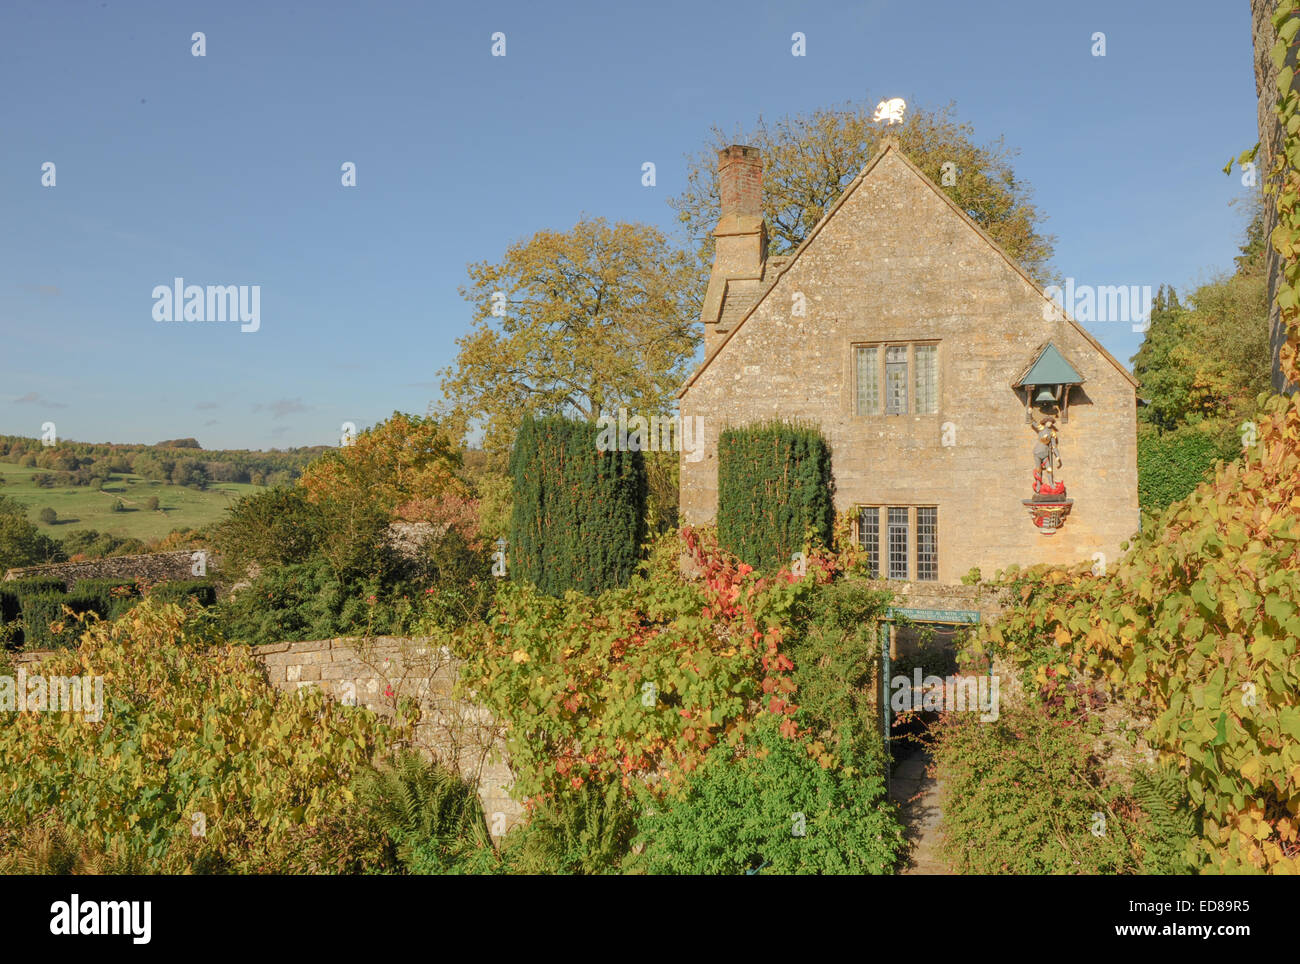 Snowshill Manor, Snowshill near the Traditional Cotswold Village of Broadway, Gloucestershire, England, UK Stock Photo